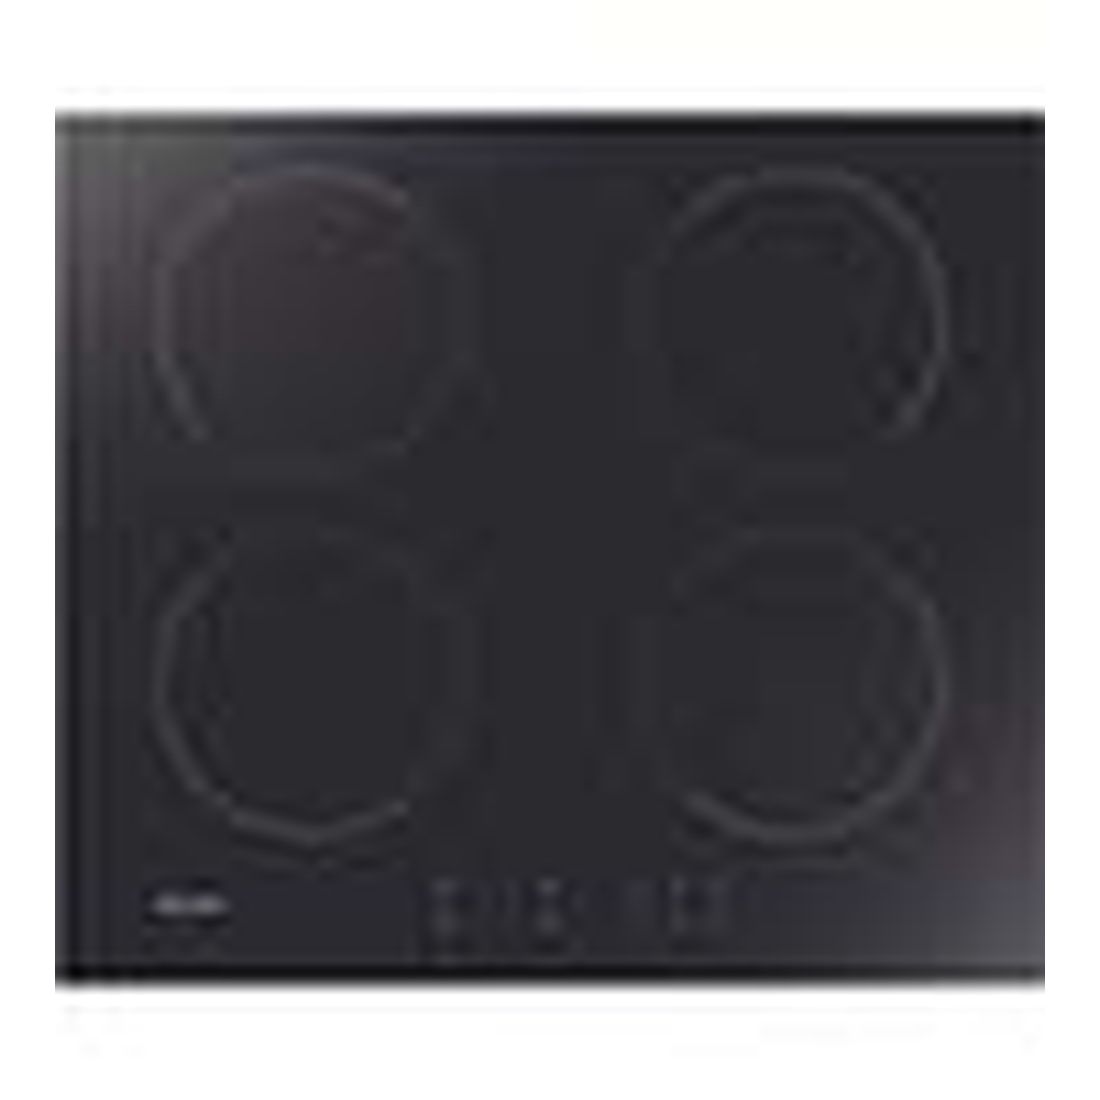 Candy 60Cm Induction Hob 4 Zone Touch Control Ci642Ctt